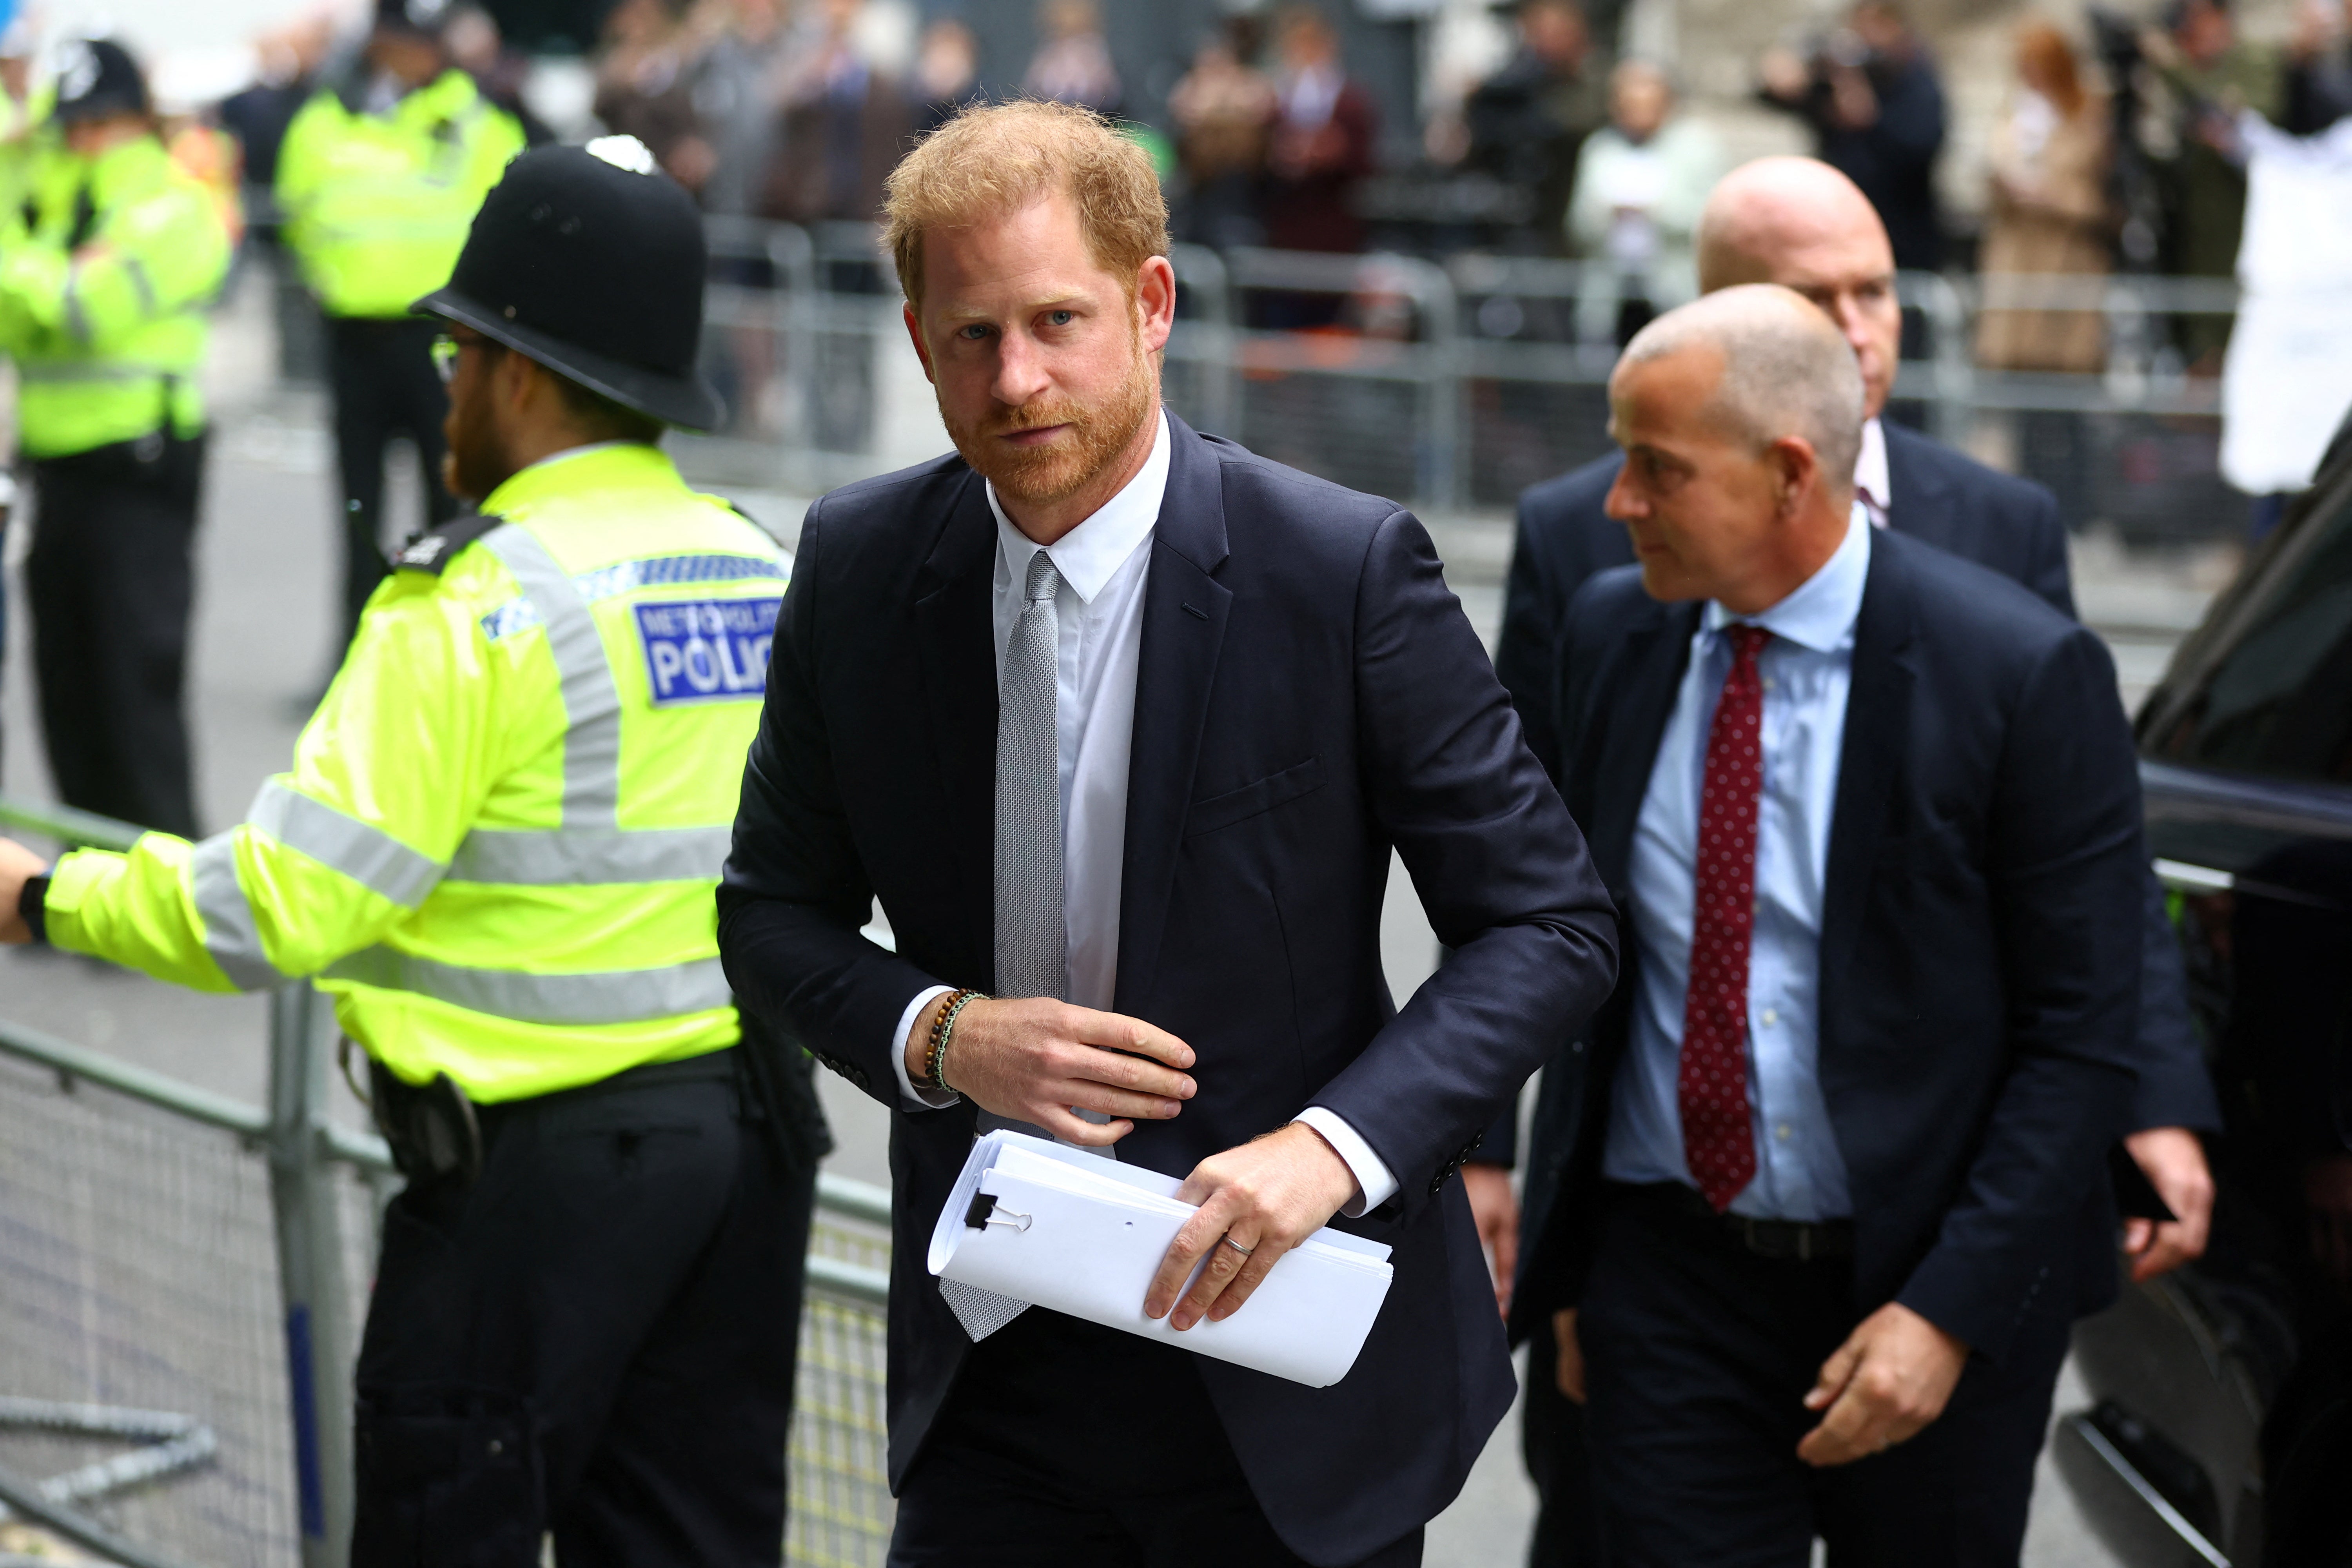 Prince Harry has admitted evidence he has given in the ongoing phone-hacking trial at the High Court contradicts a claim he made in his memoir Spare